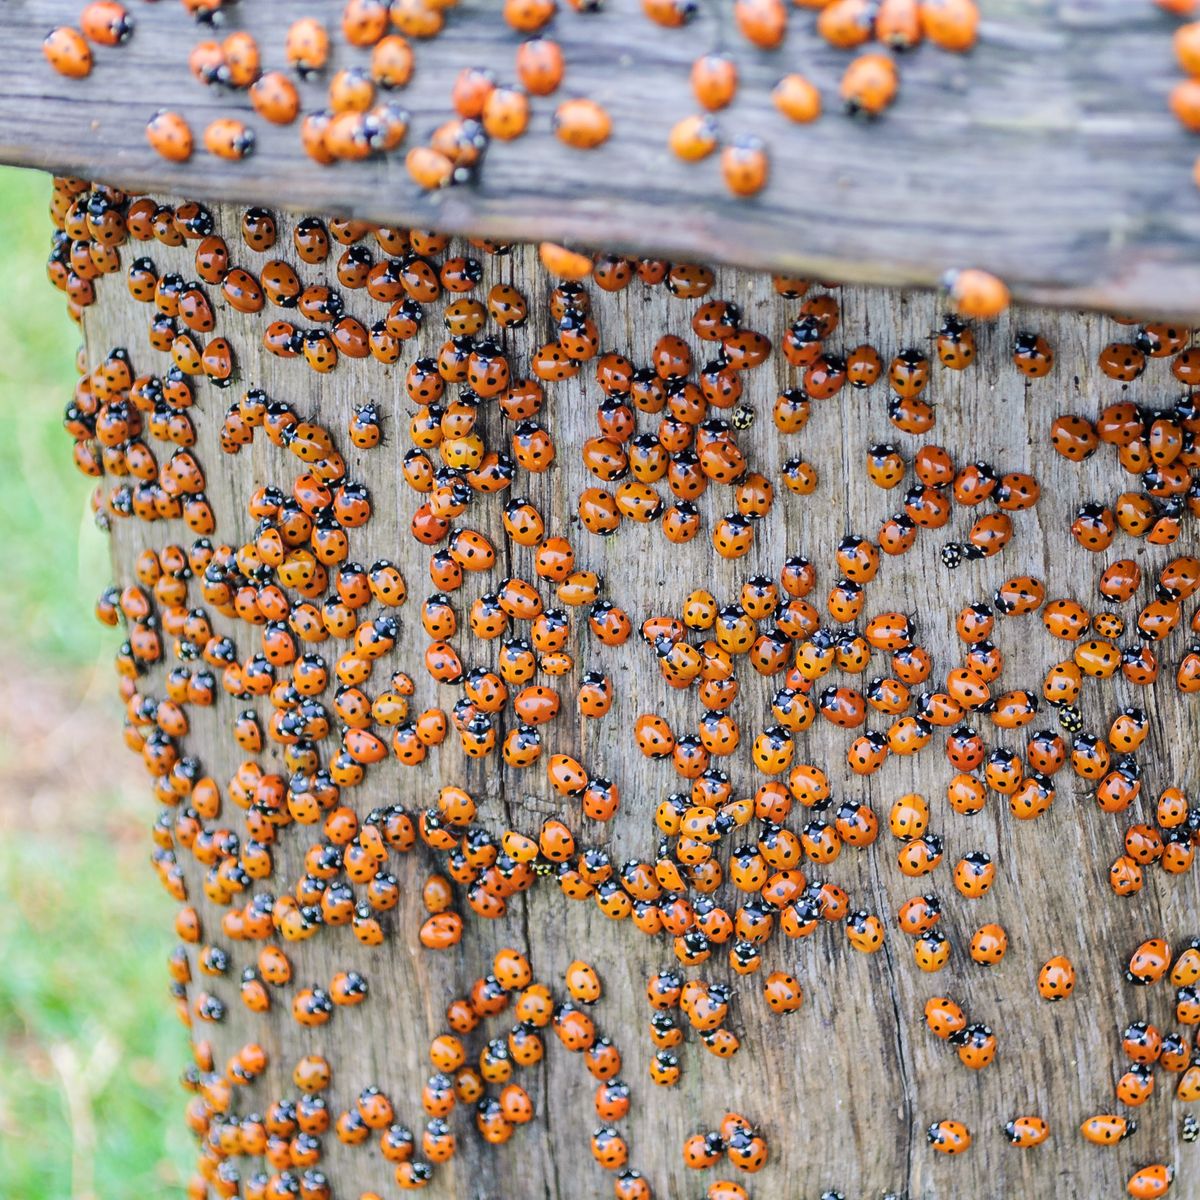 Asian Lady Beetles Are The Bad Version of Ladybugs—Here's How to